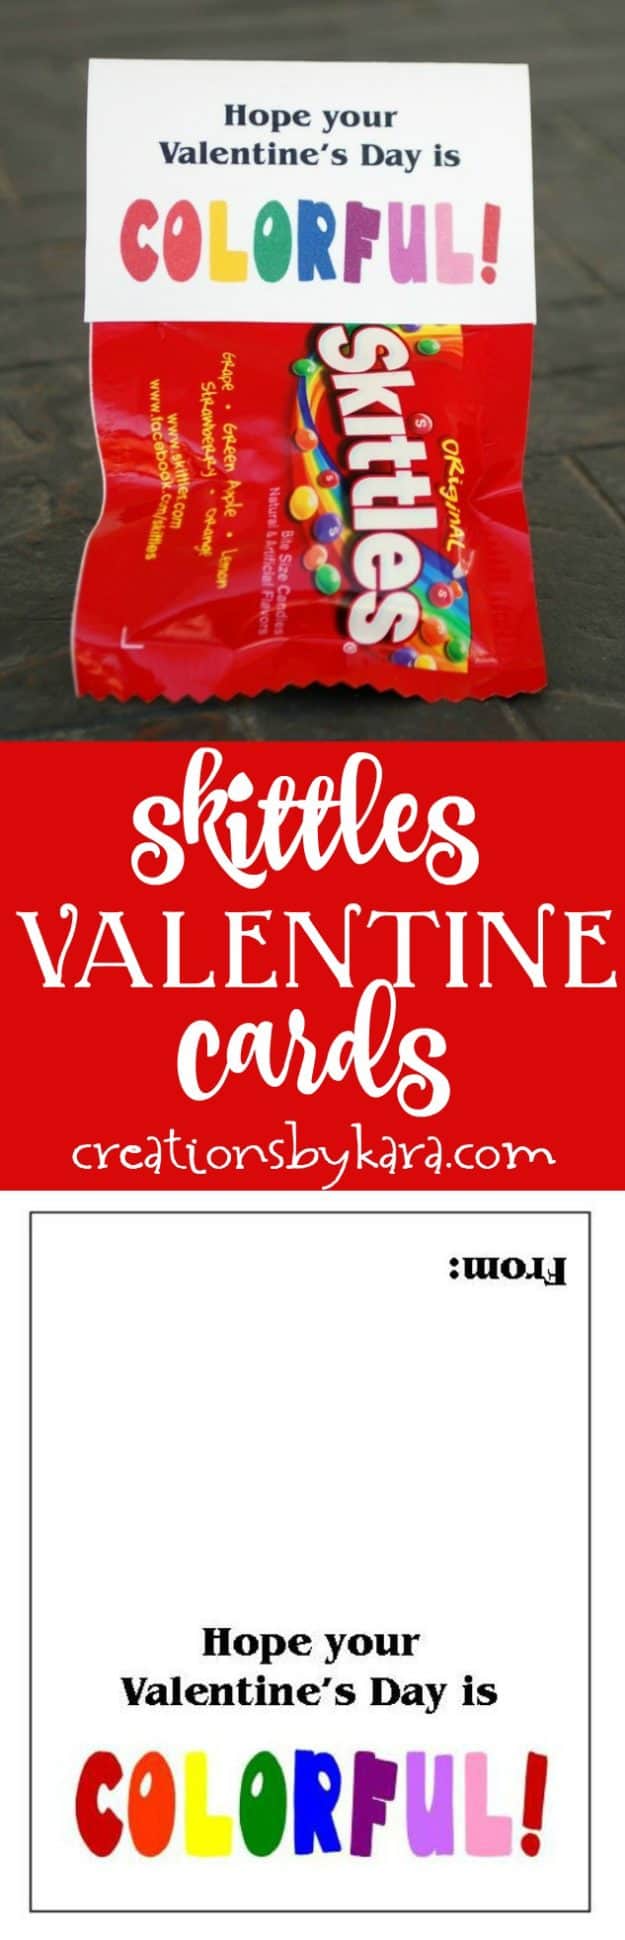 Printable Valentines cards with Skittles